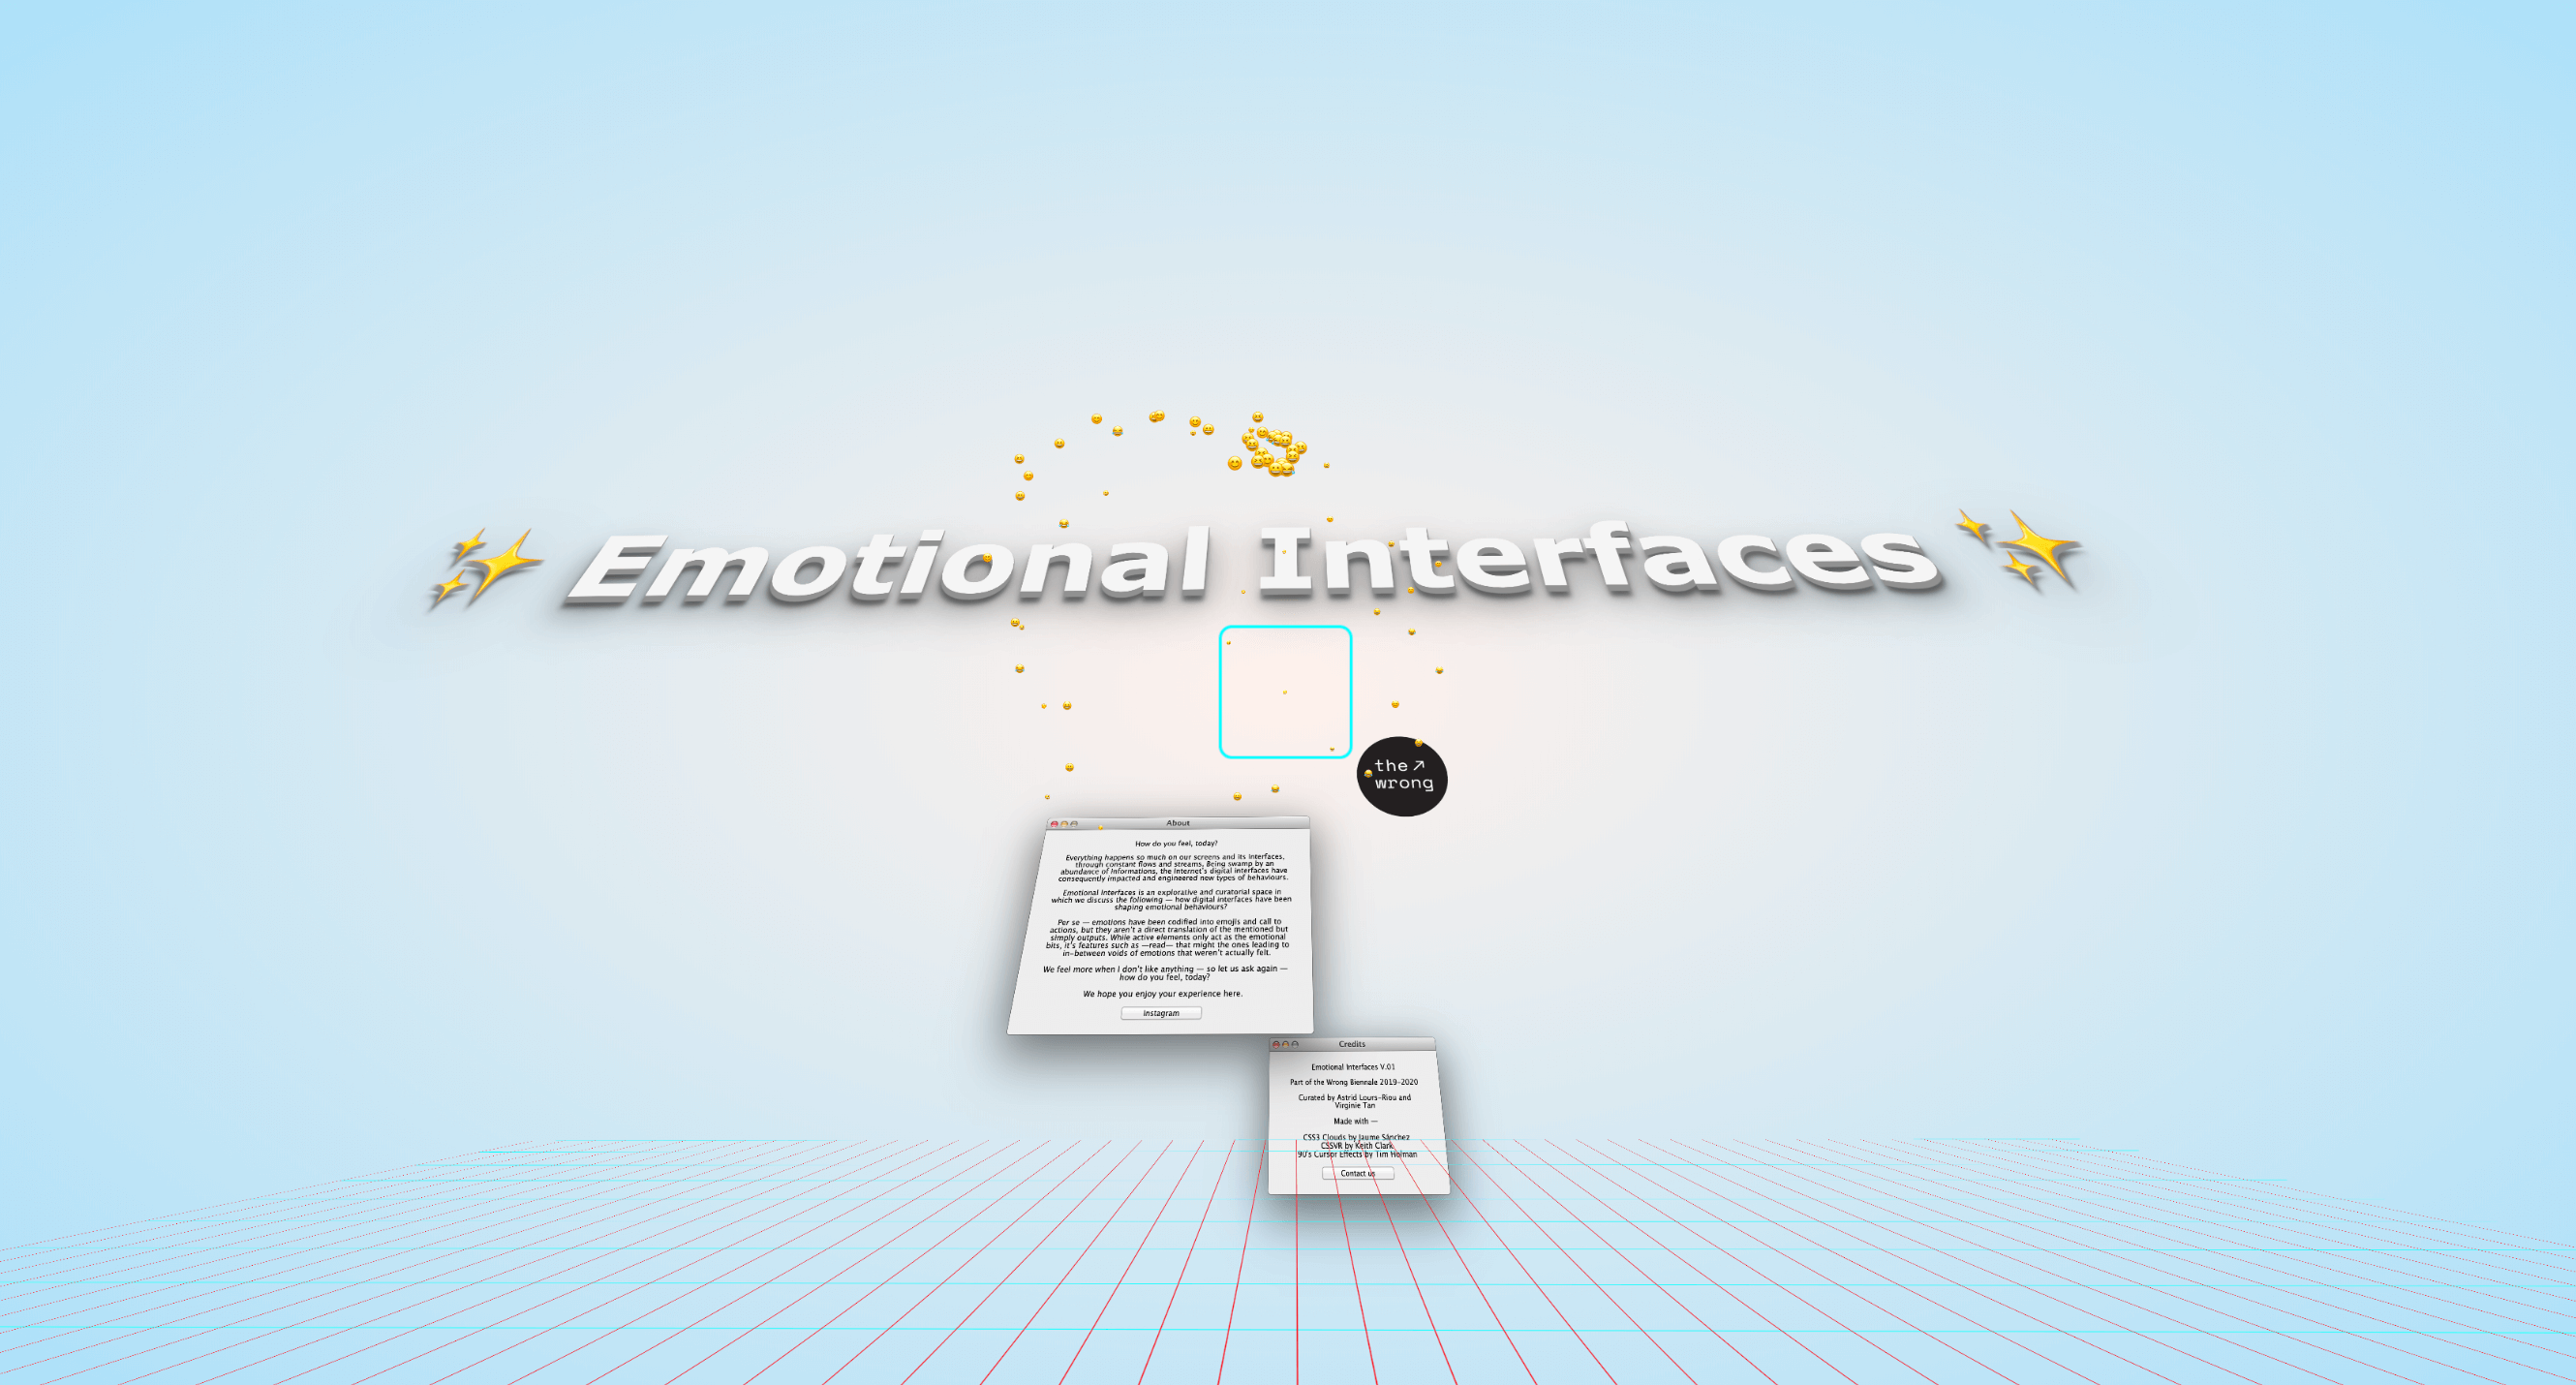 Emotional Interfaces' online exhibition